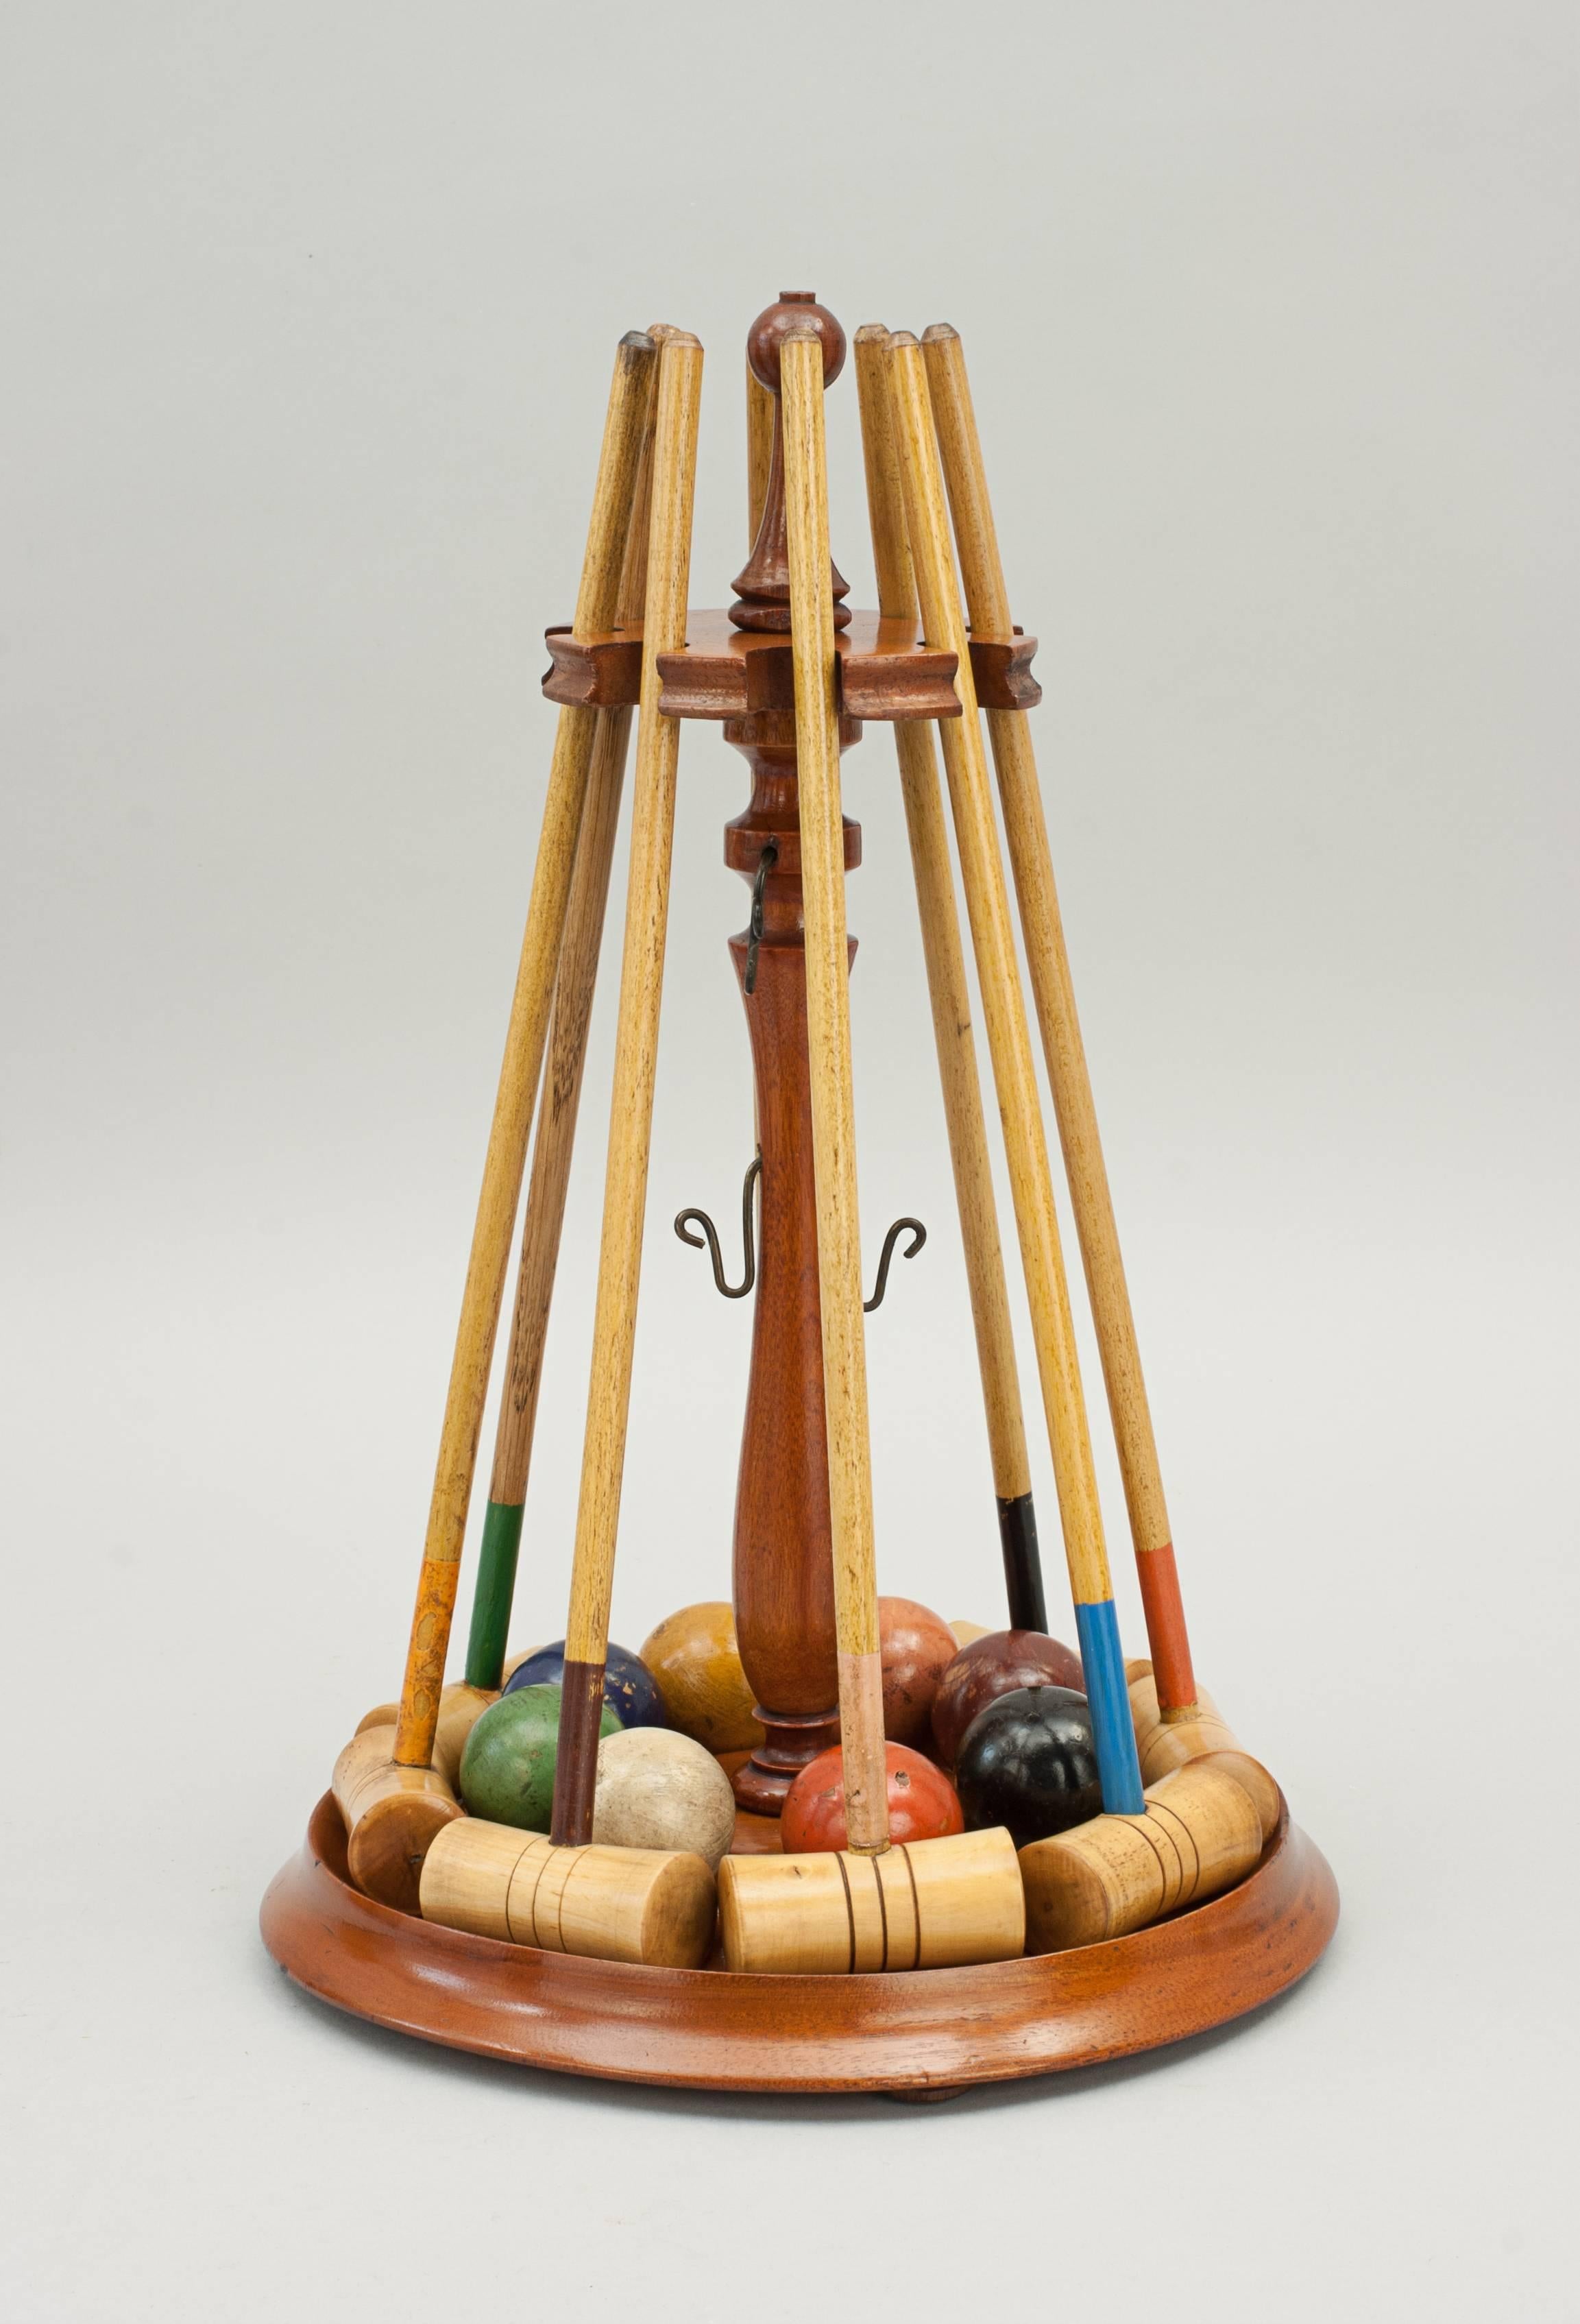 Miniature croquet set.
An original parlour game of miniature croquet. The tabletop croquet set comes on its original turned mahogany stand and original pine box. The set contains 8 mallets and balls all made of boxwood. To complete the set there